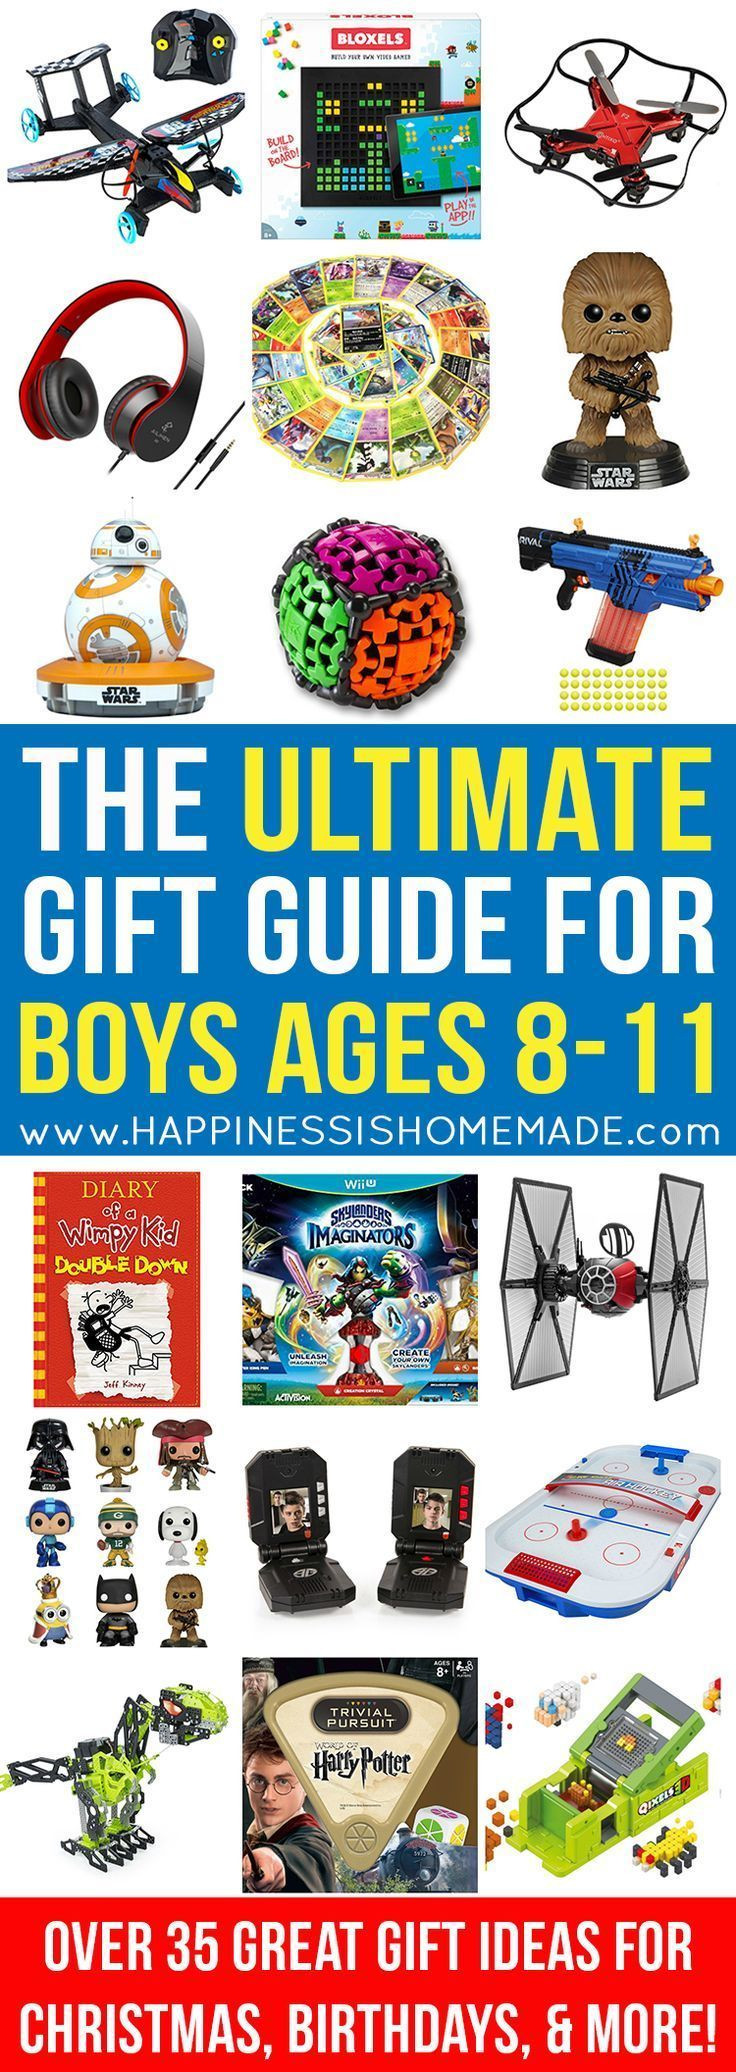 Gift Ideas For Boys 10
 88 best Best Toys for 9 Year Old Boys images on Pinterest